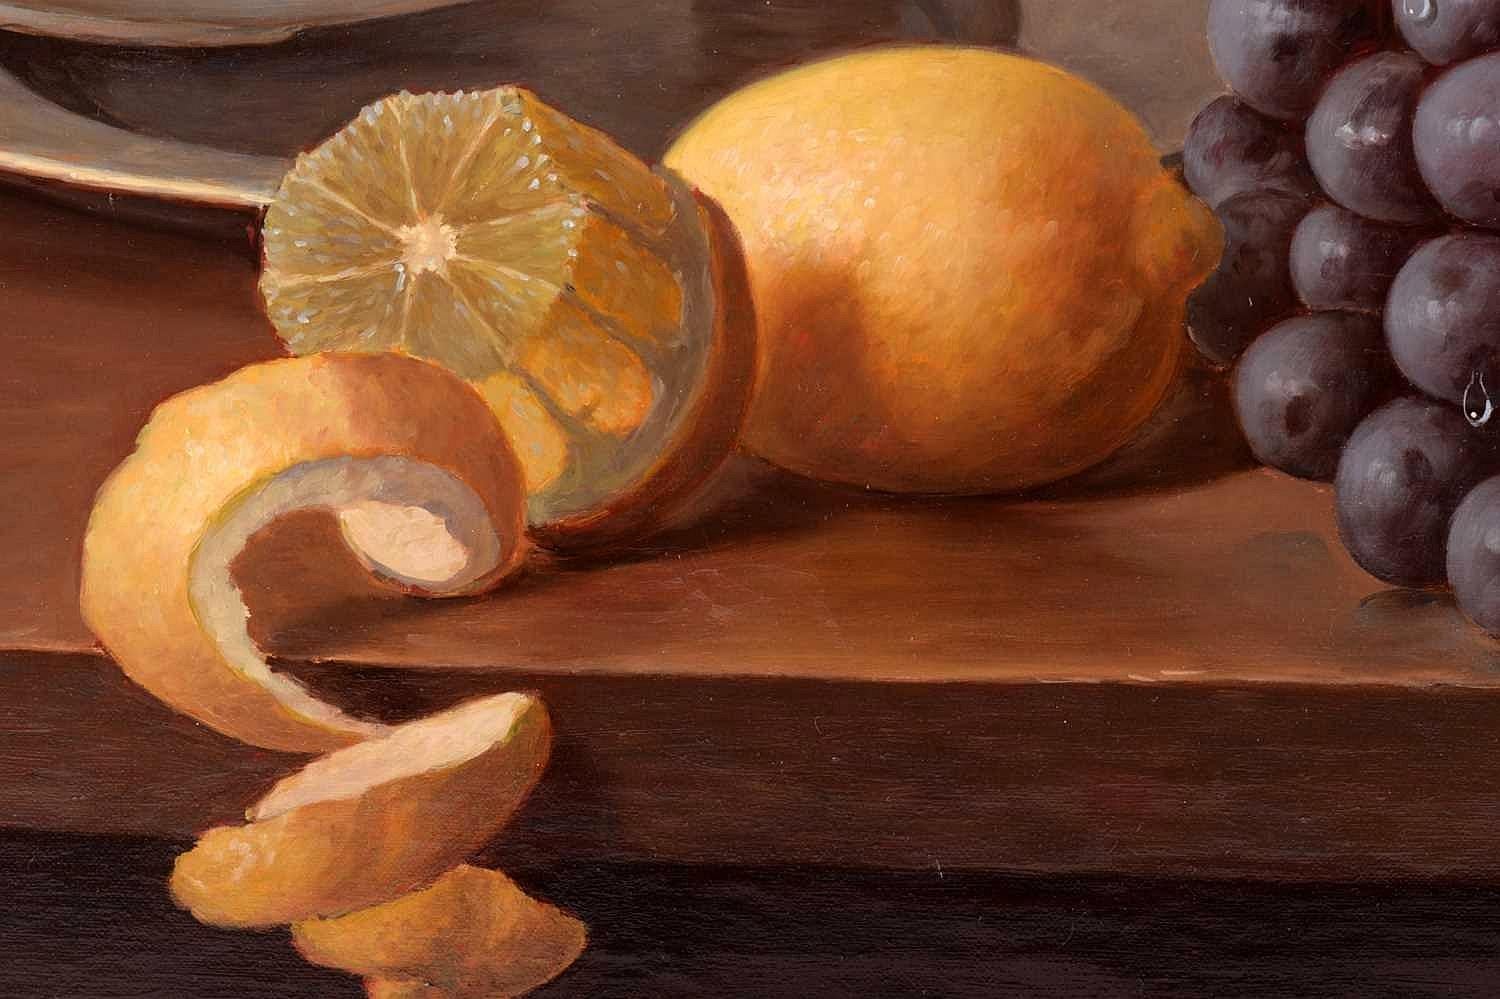 This beautiful oil on canvas still life by Dutch artist Eduard Peter Moleveld depicts fruits, a tankard and open book on a table.

A whole and half sliced orange sit within a Delft bowl, whilst a half peeled lemon rests on the edge of the table. Two